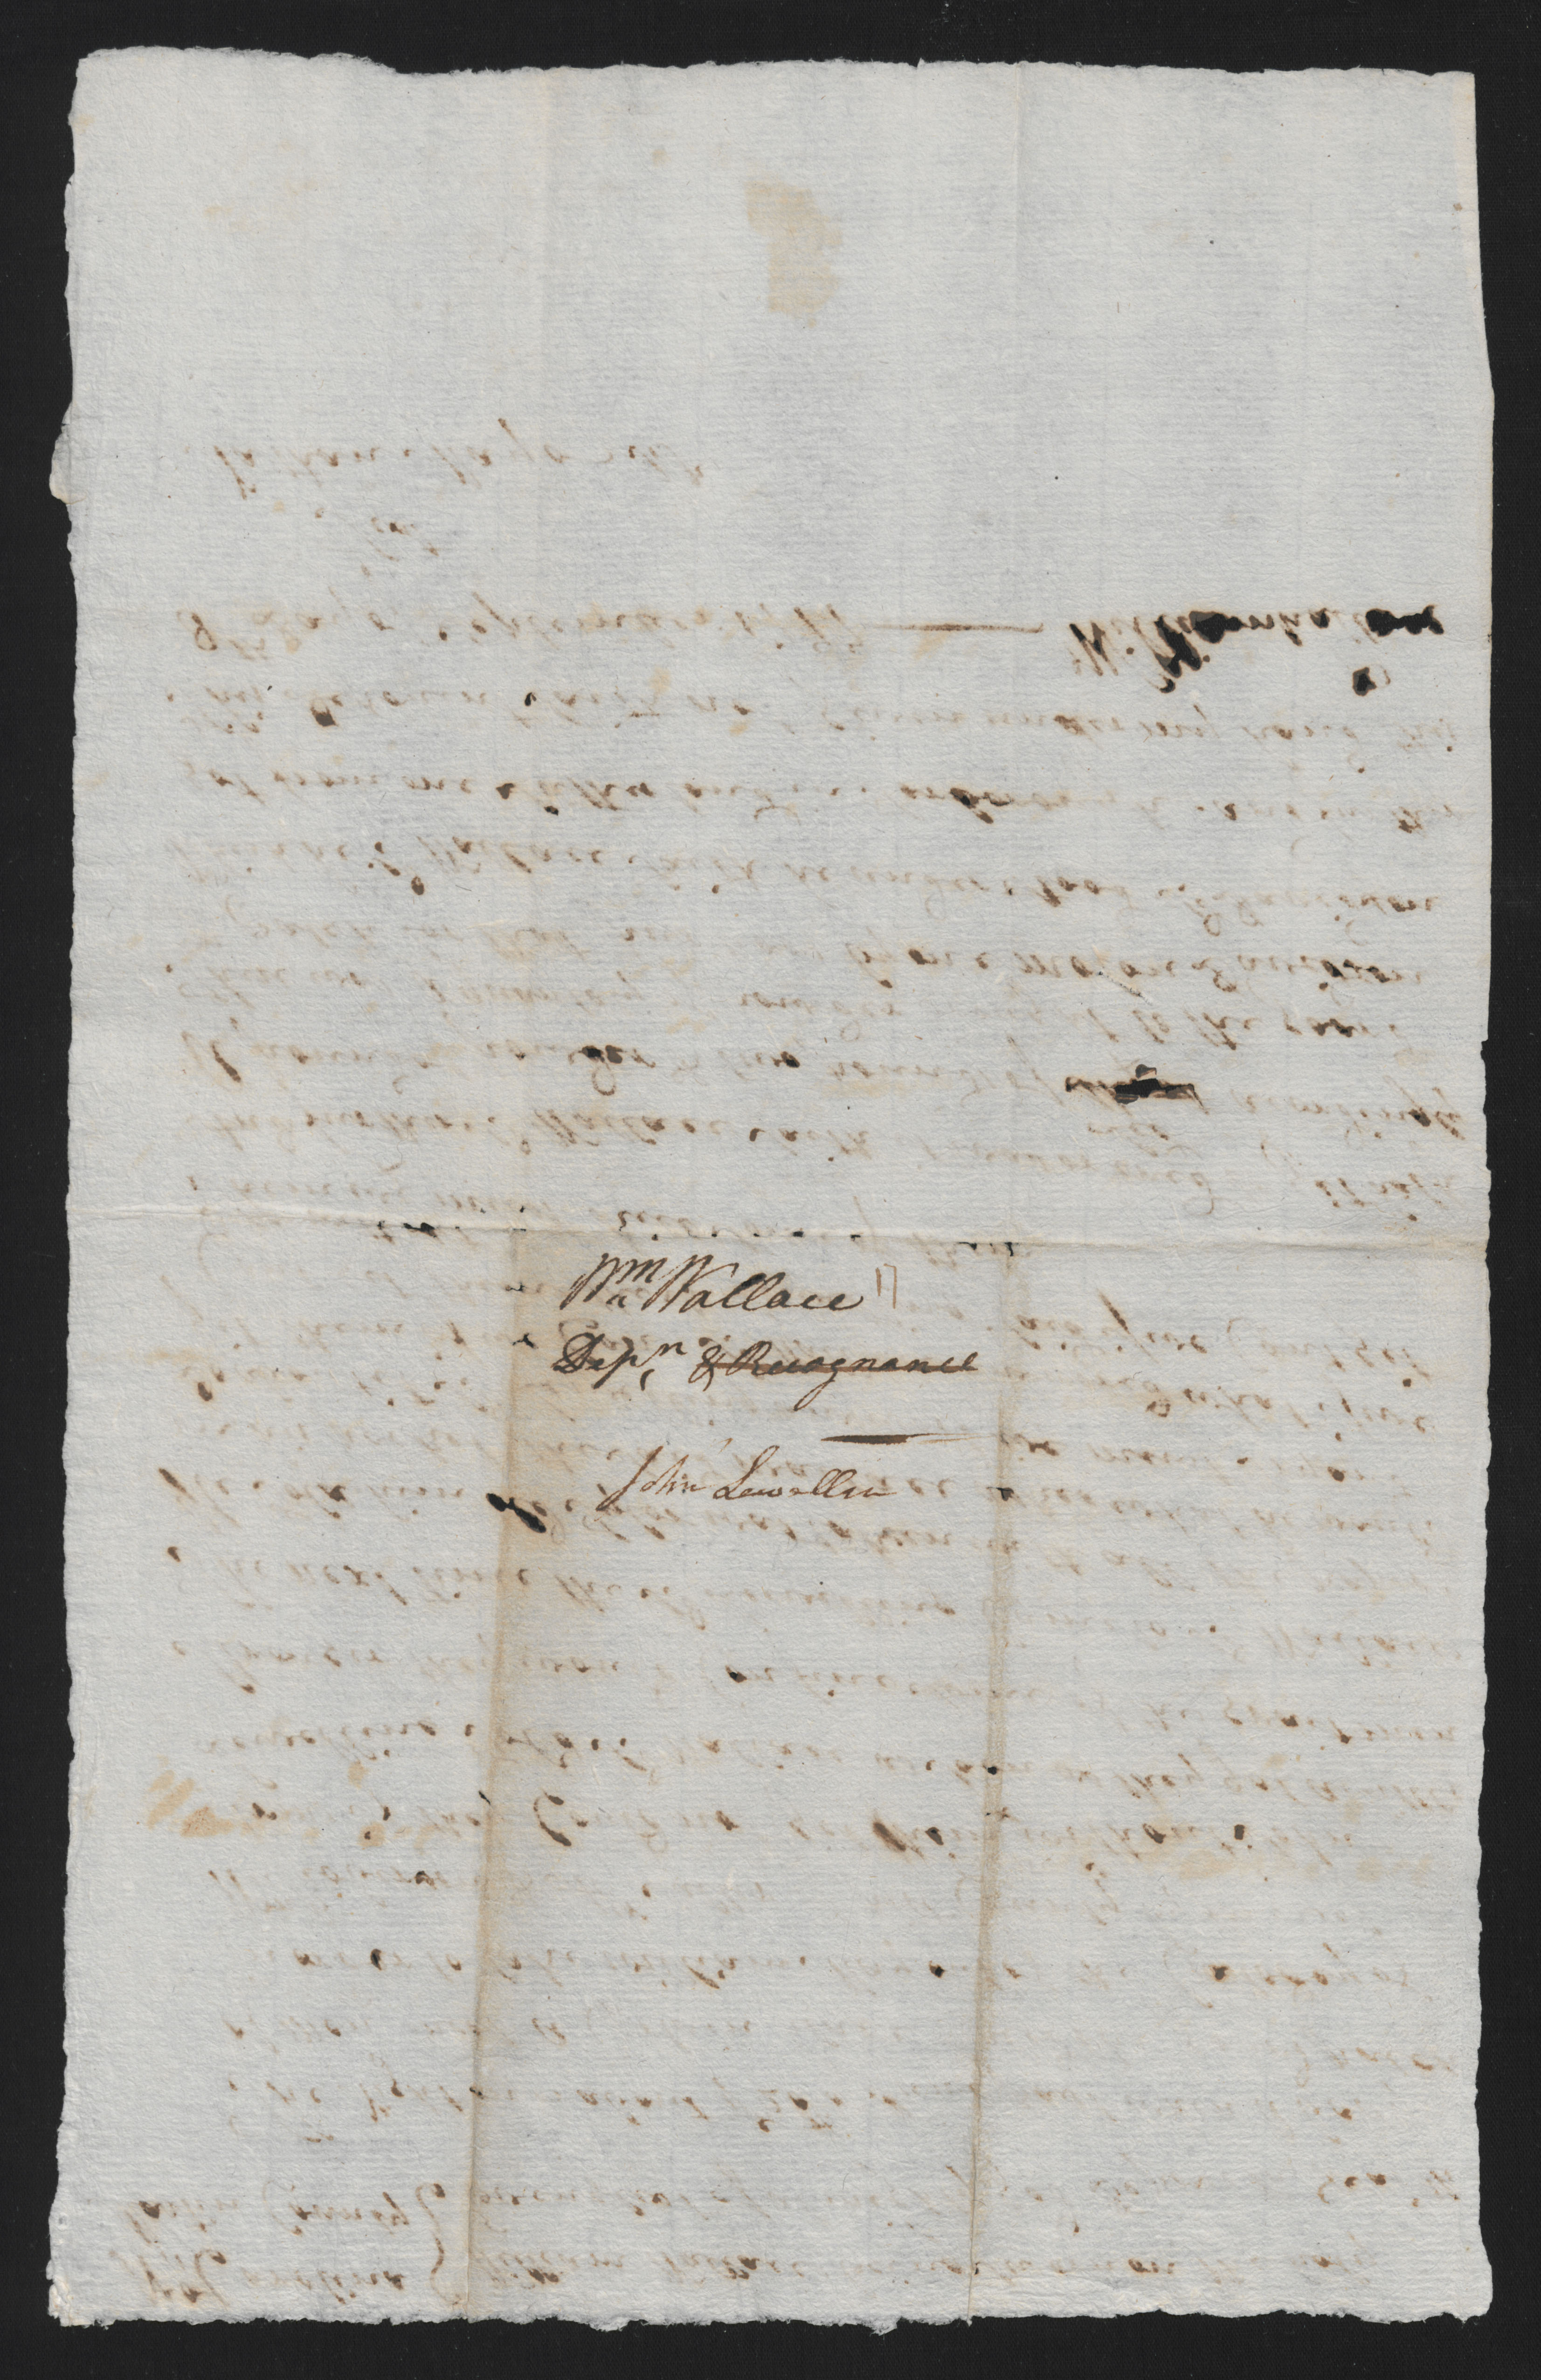 Deposition of William Wallace, 8 September 1777, page 2